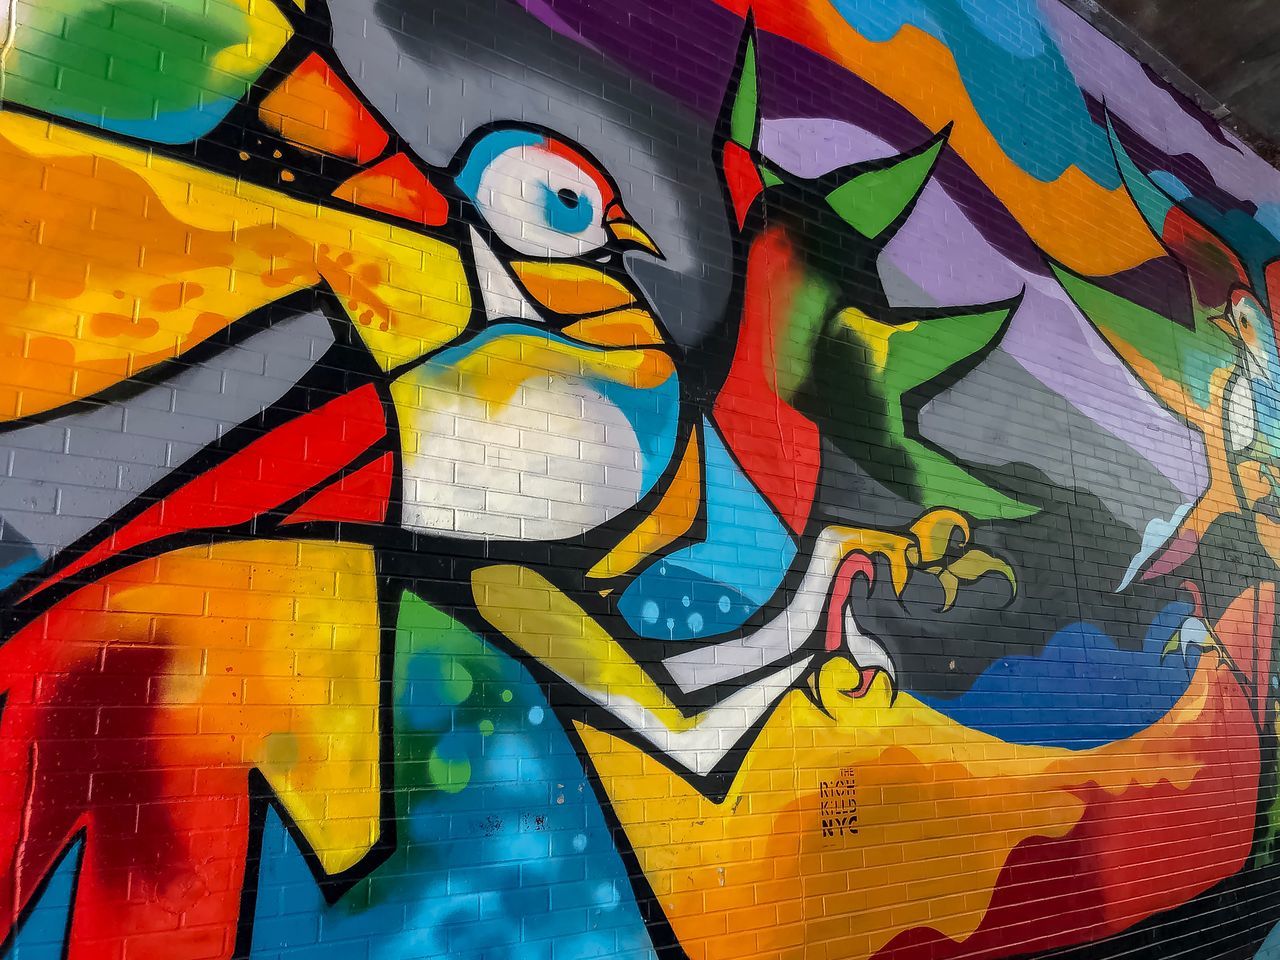 multi colored, art and craft, creativity, full frame, representation, no people, backgrounds, graffiti, human representation, pattern, close-up, wall - building feature, mural, design, abstract, street art, painted, paint, outdoors